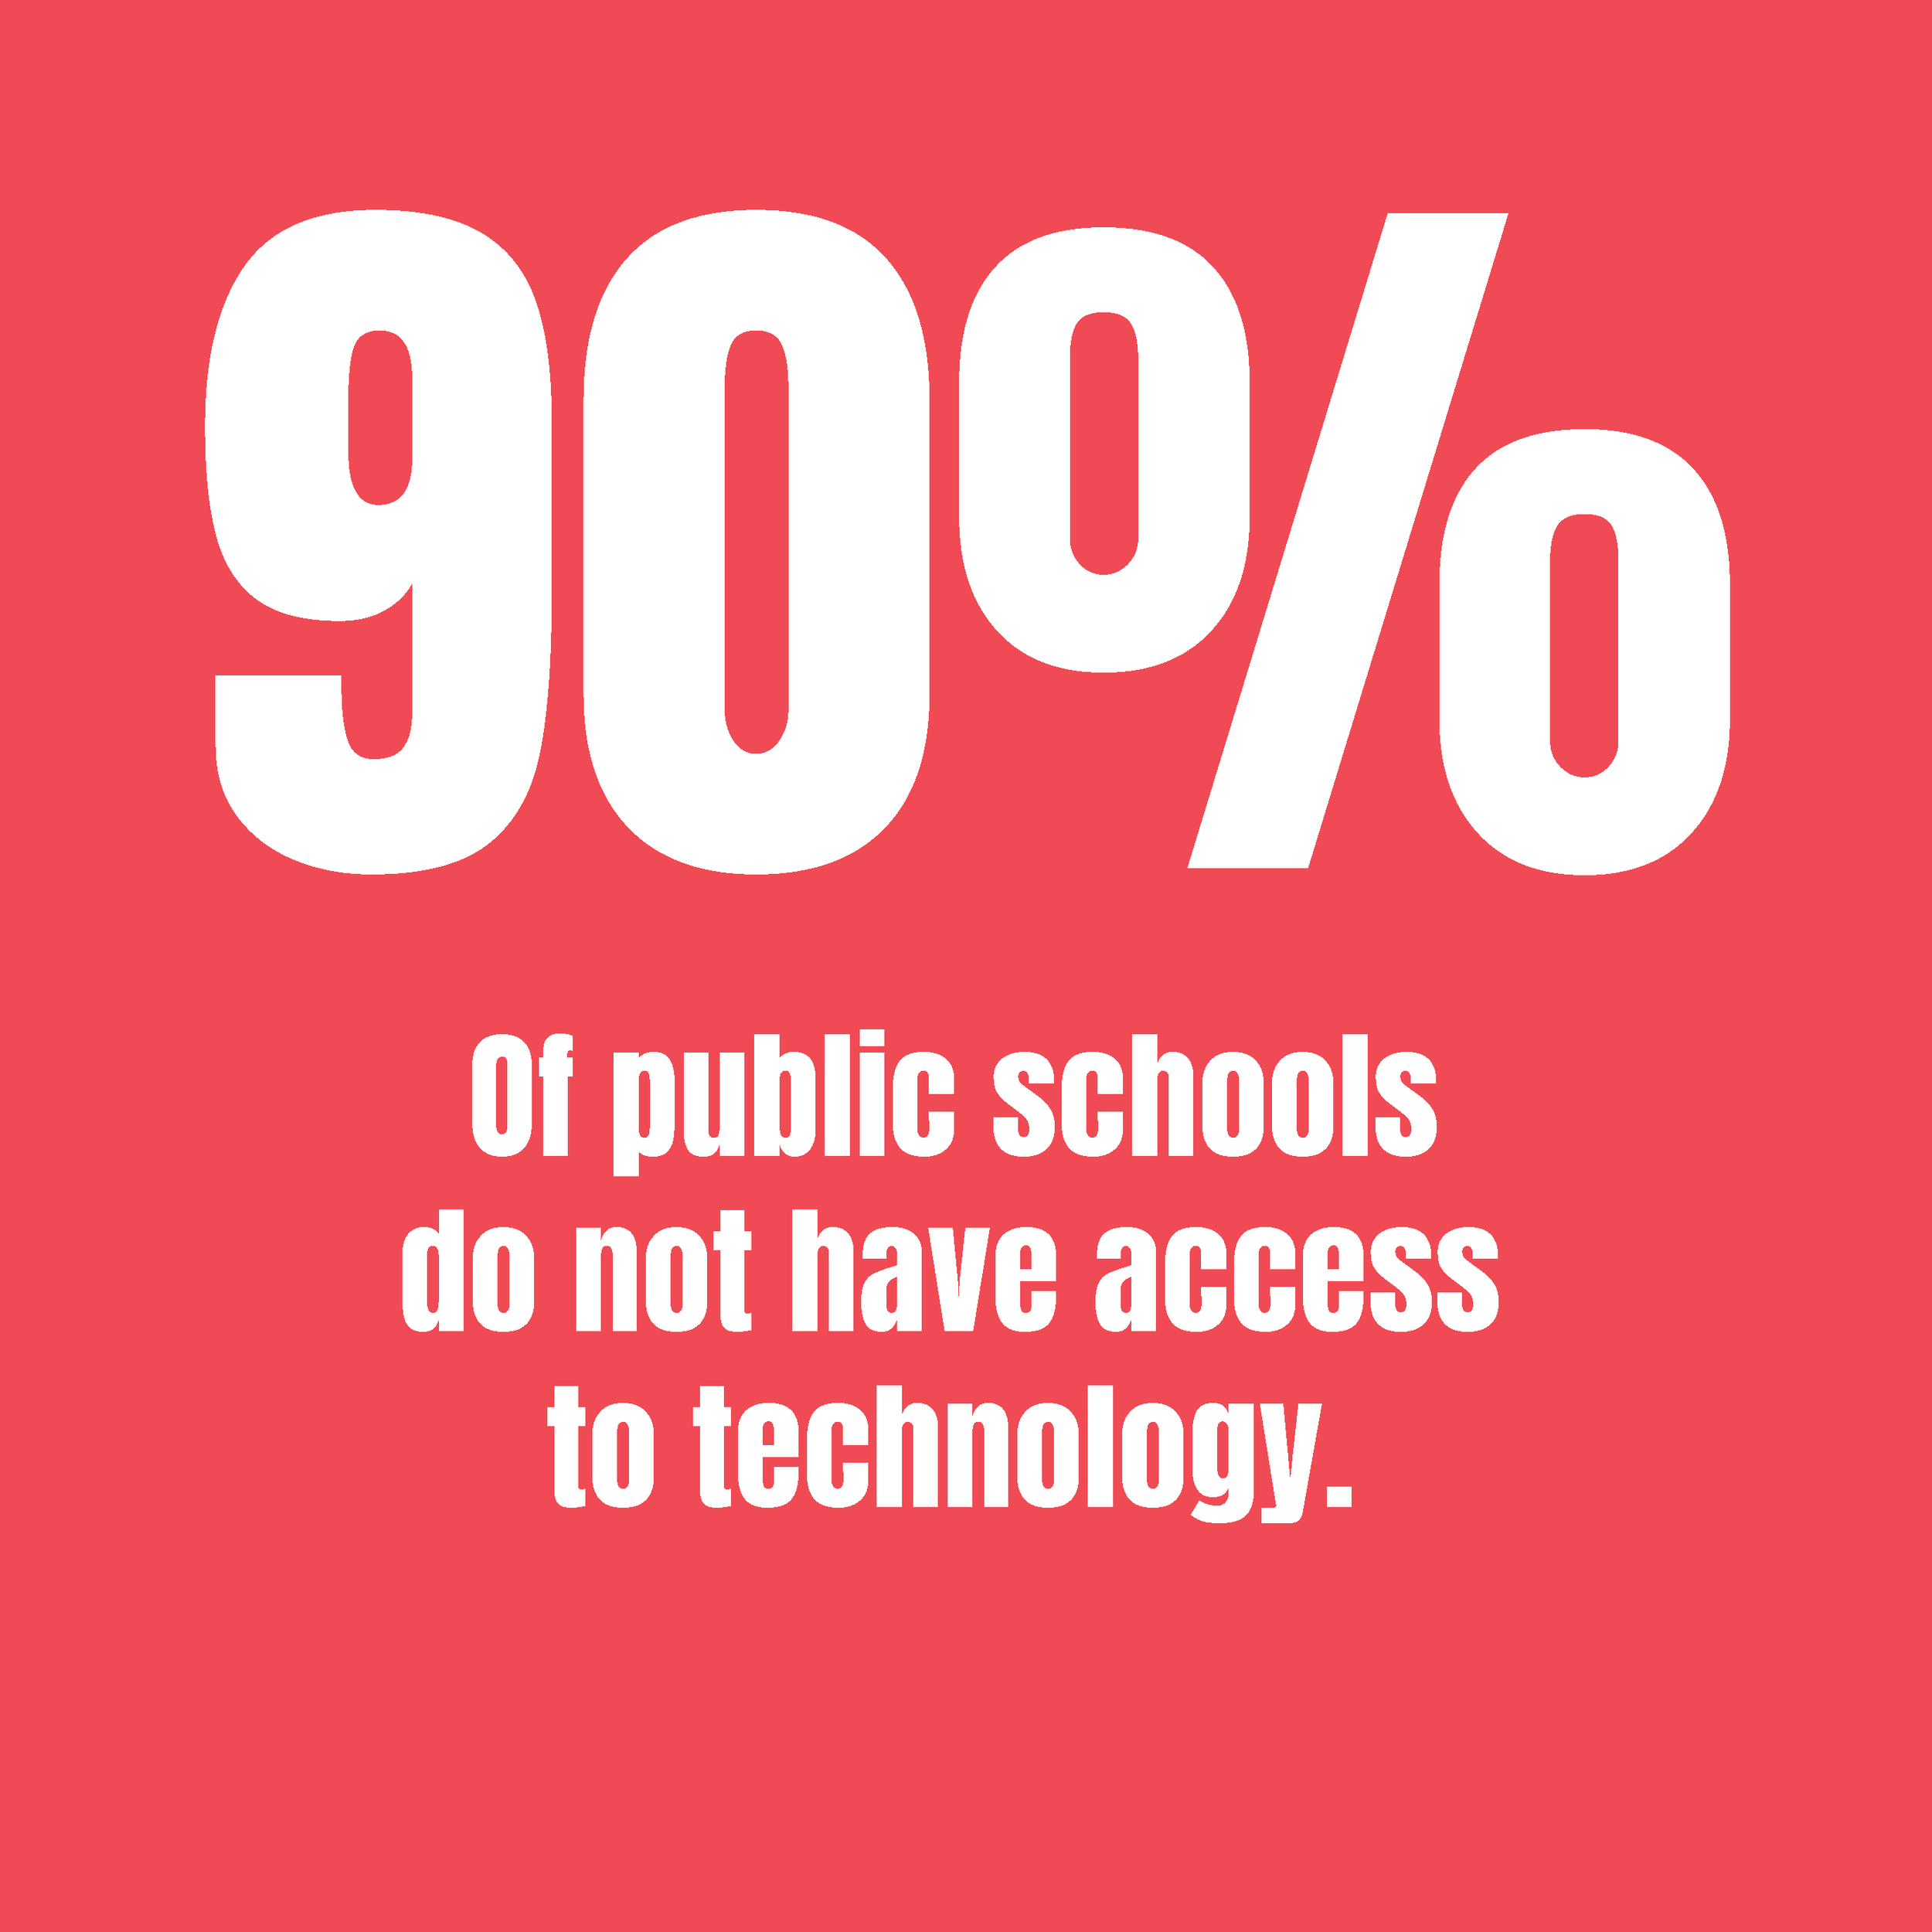  Today Guatemala has over 18 thousand elementary public schools, and 90% of those lack access to technology. 